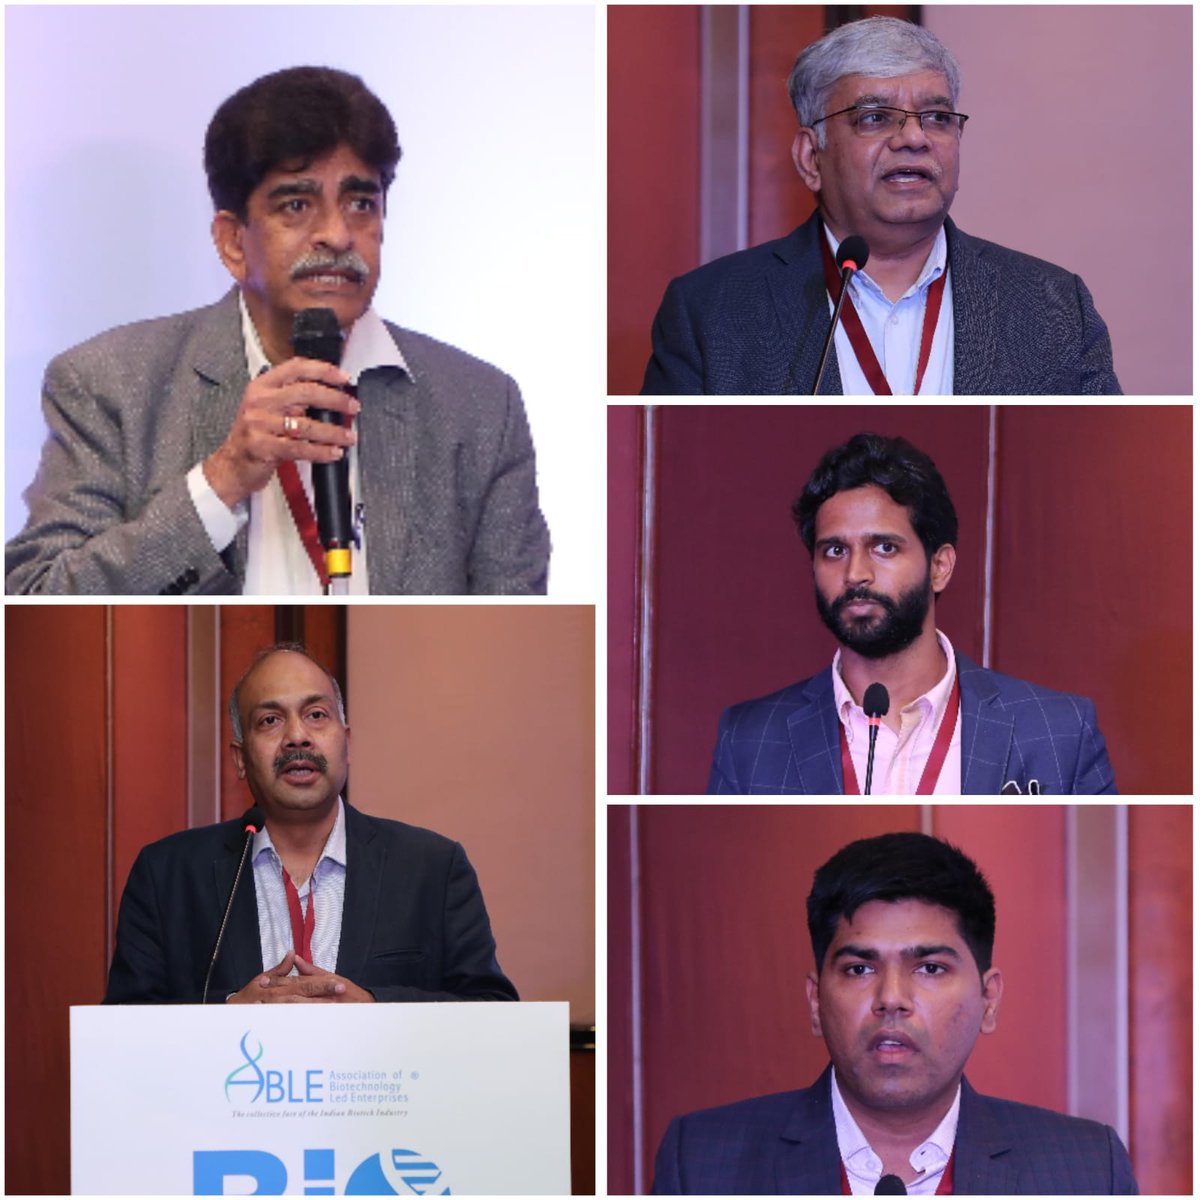 BioEconomy Conclave 2022: Session on Industrial Biotech 'New Innovations and emerging opportunities' in Enzymes, Bioenergy, Smart Protein & Synthetic biology- moderated by President ABLE Krishna Mohan @Novozymes Kumbhar @PrajIndustries @varunrdeshpande GFI, Aditya Ravi #Laurusbio